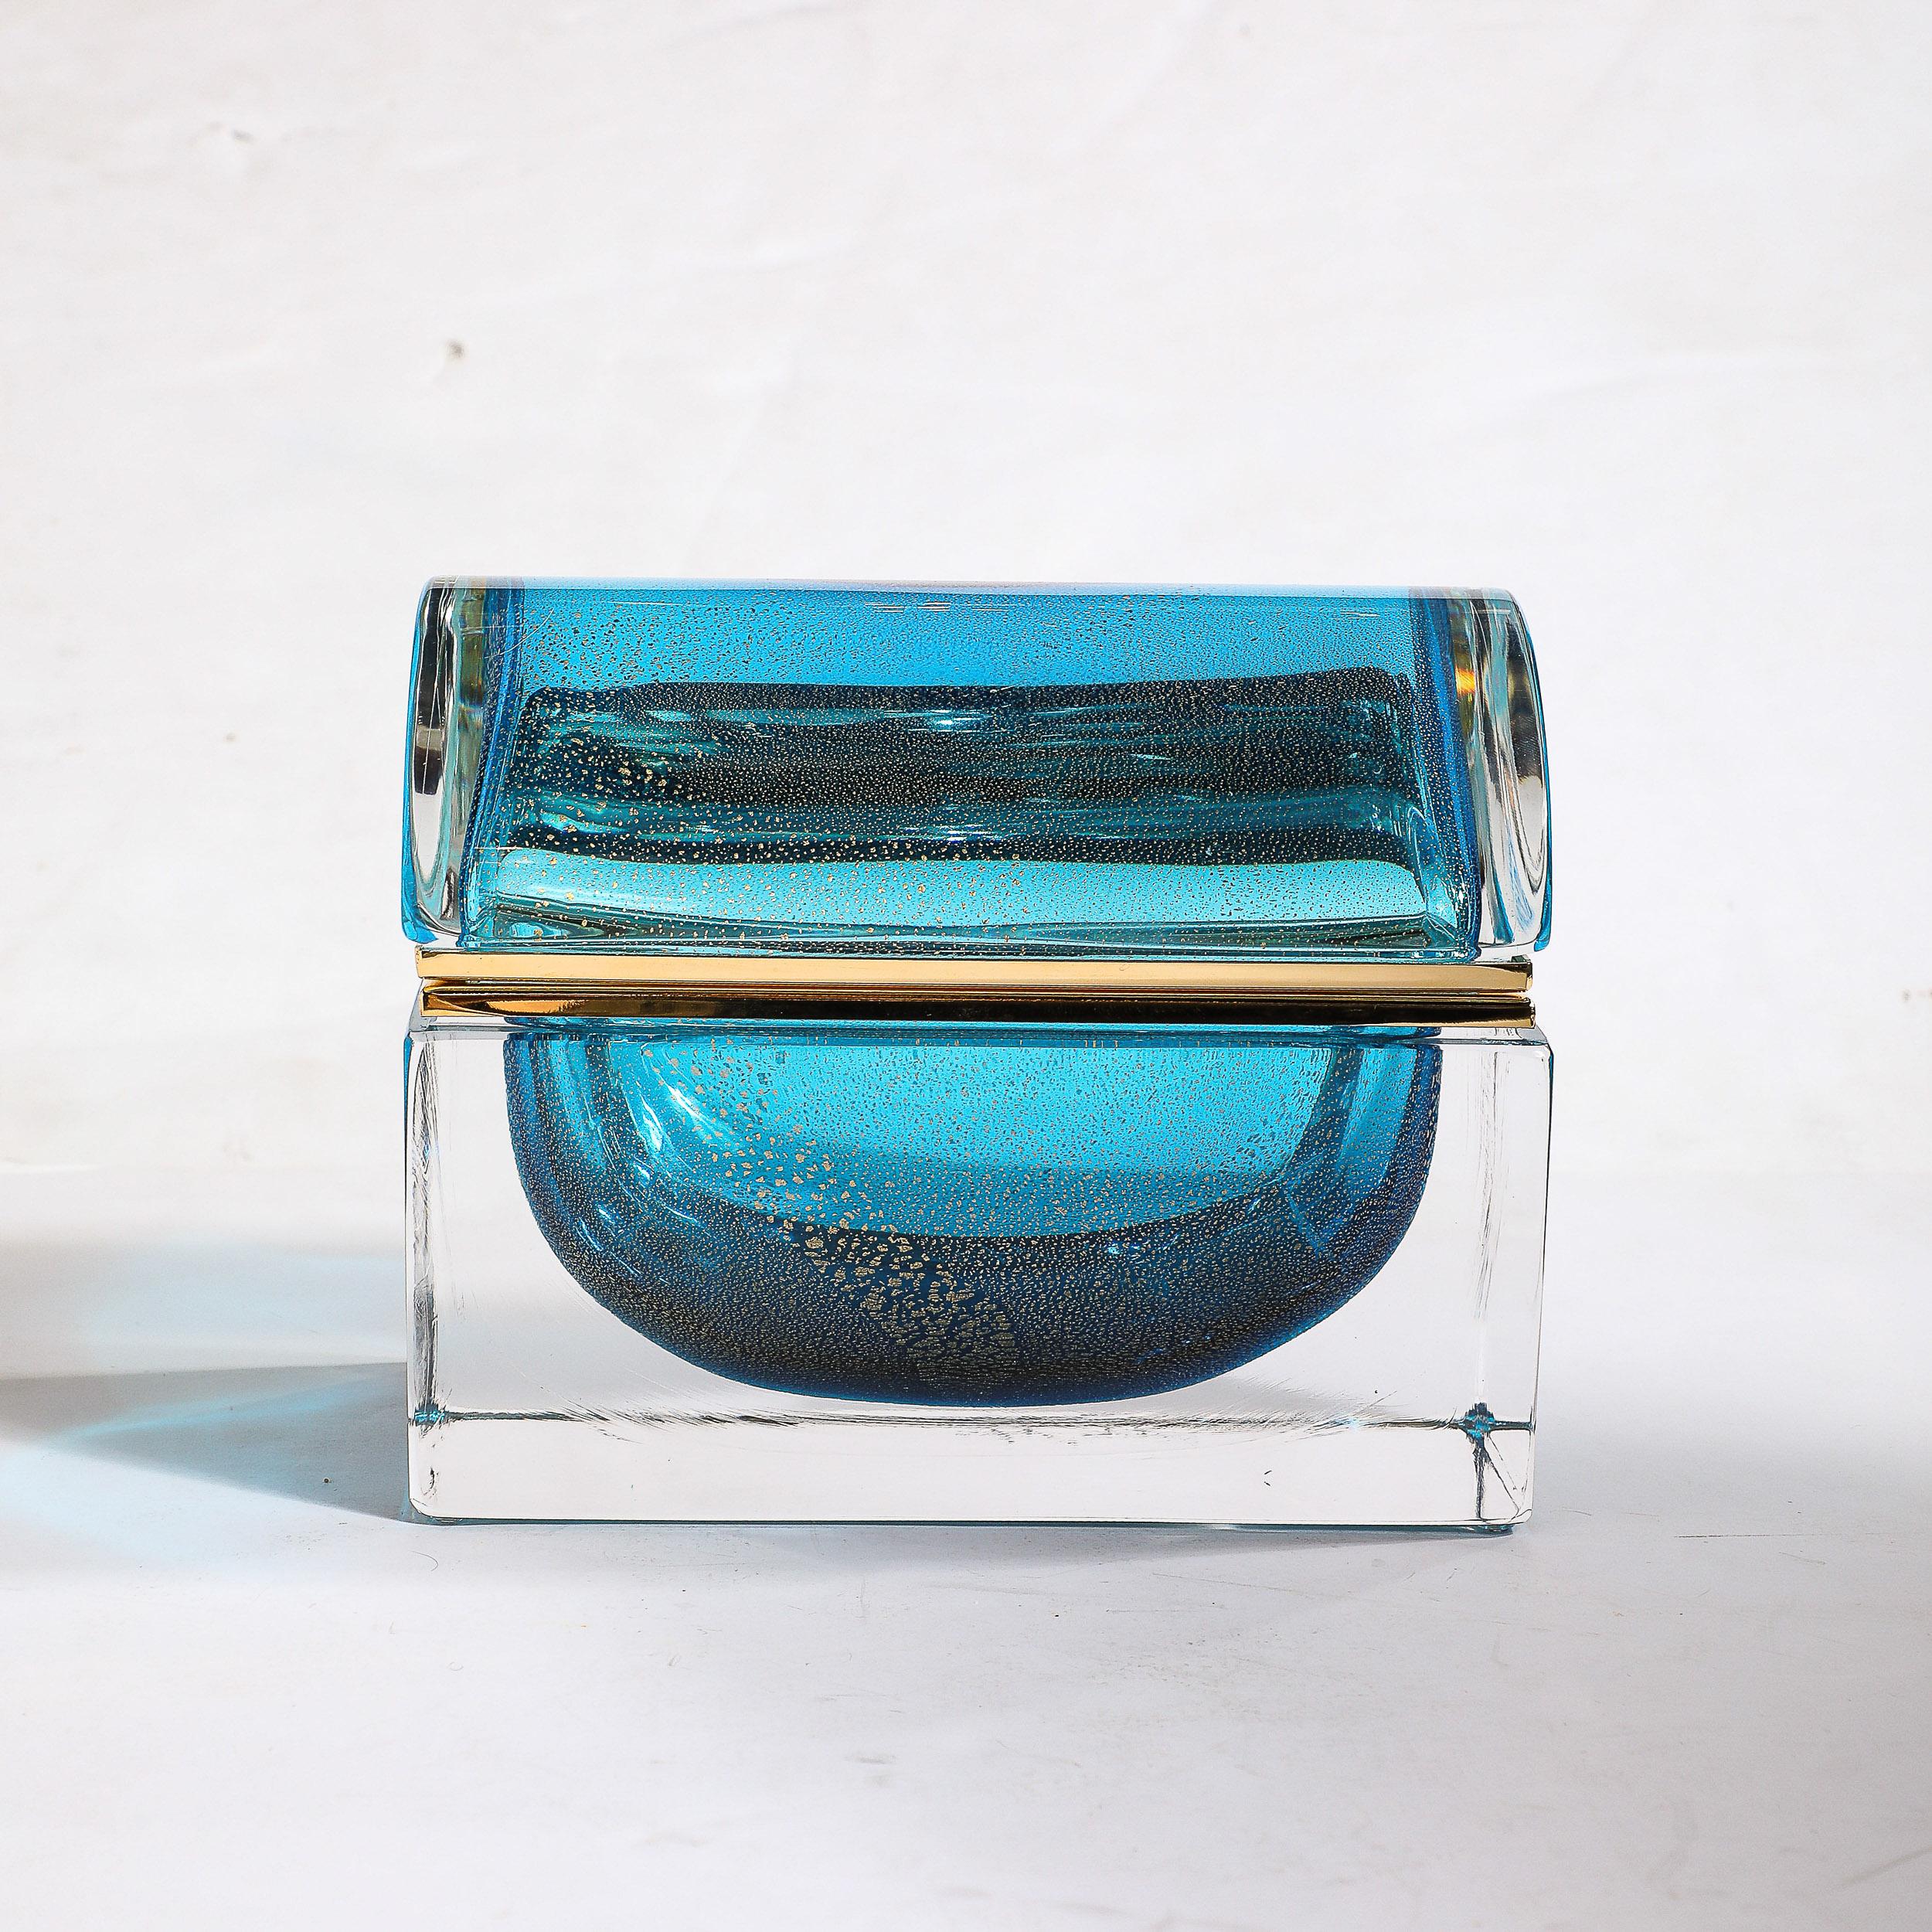 This serenely gorgeous Modernist Hand-Blown Murano Glass Box in Aquamarine W/24 Karat Gold Flecks & Brass Fittings originates from Italy during the 21st Century. Features a rounded top with translucent glass on the outer surface, beneath which is a